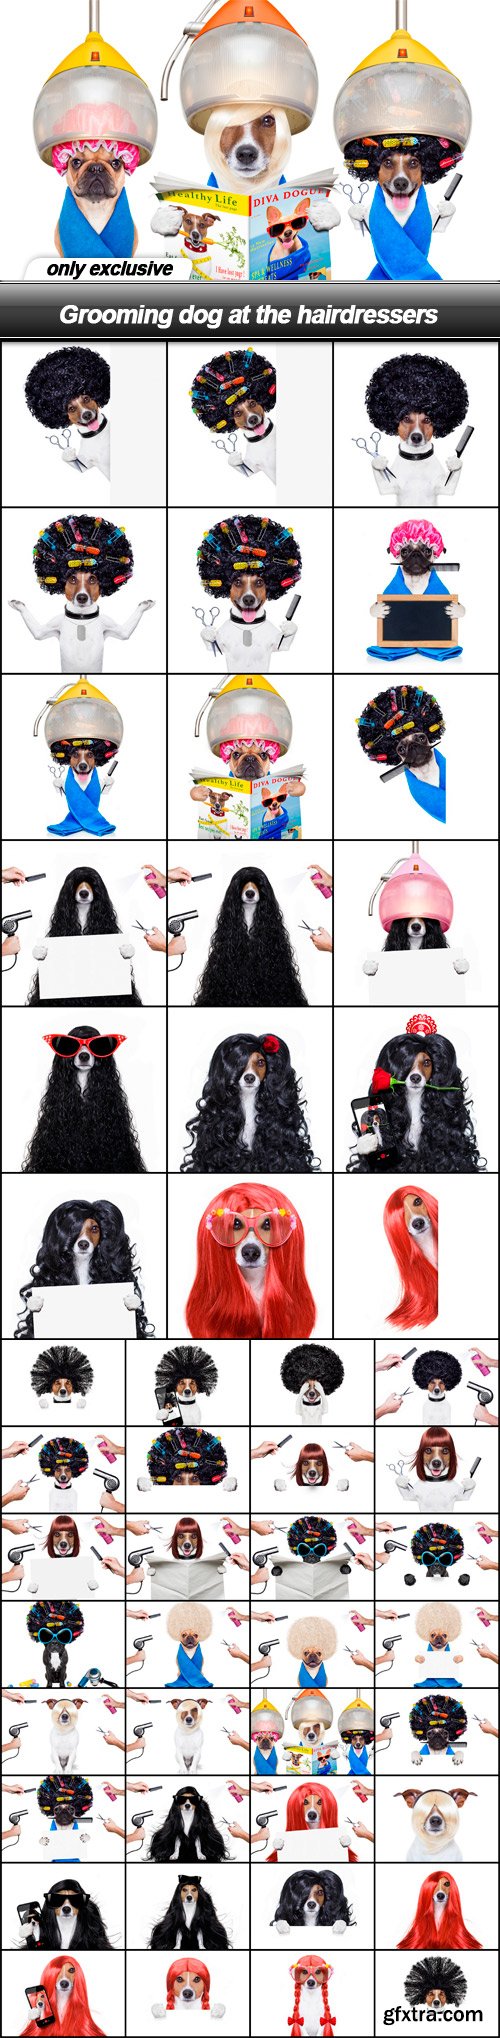 Grooming dog at the hairdressers - 50 UHQ JPEG